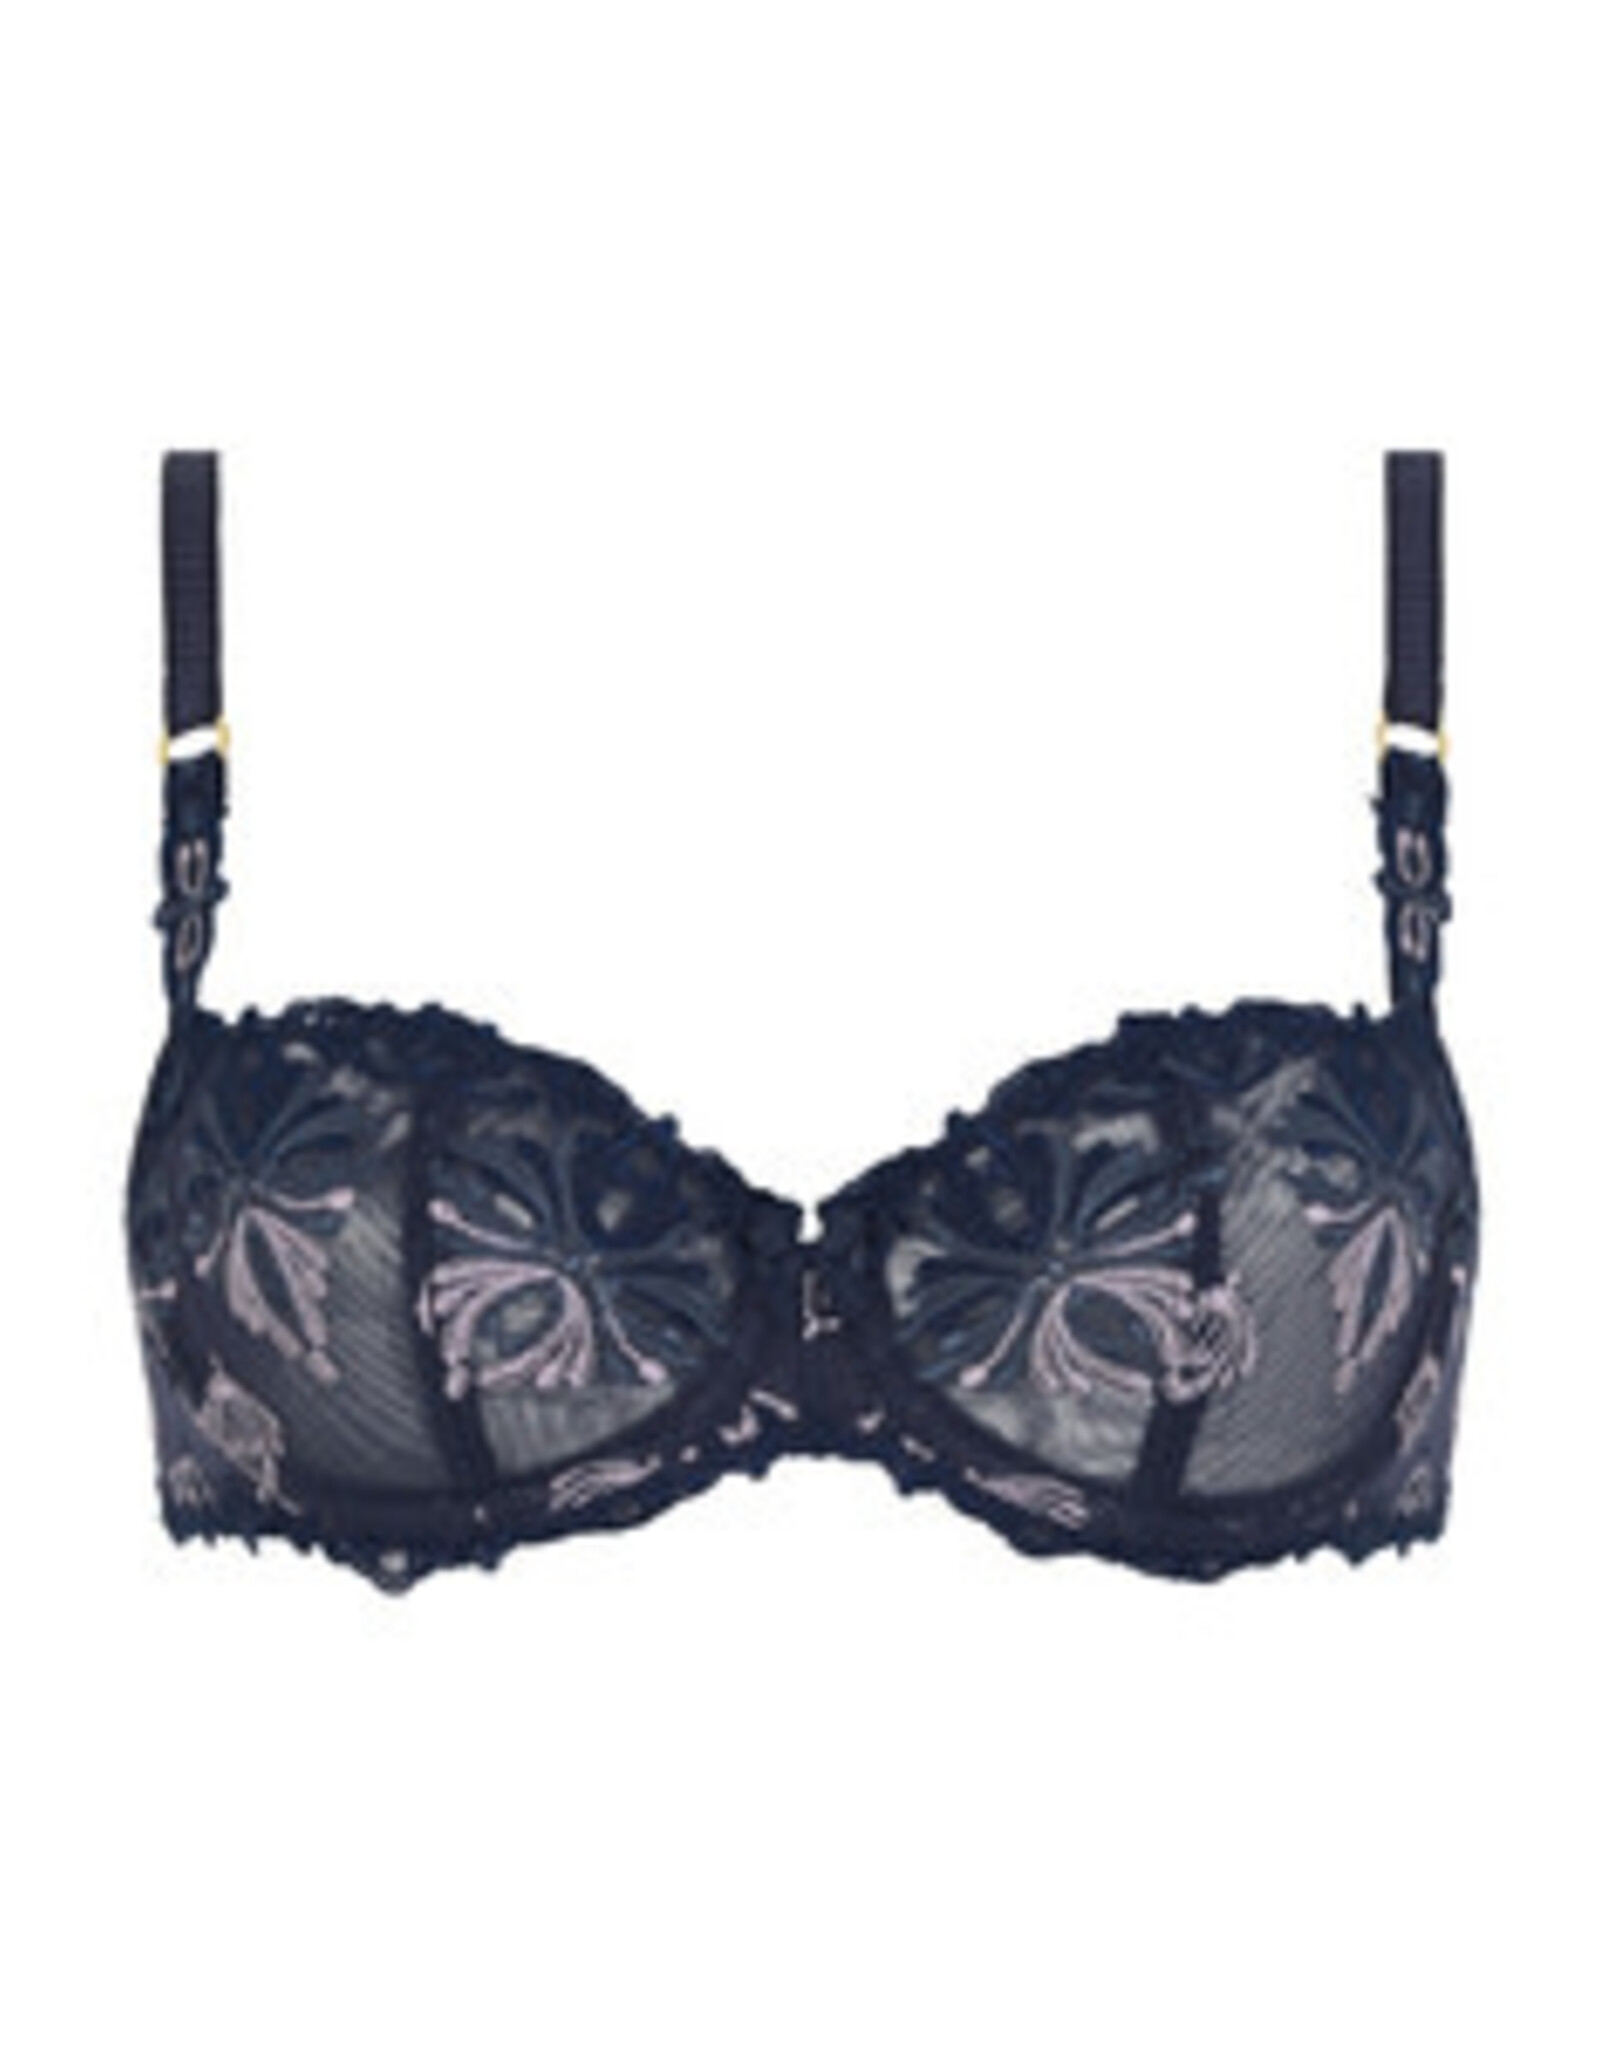 Womens Lingerie Champs Elysees Full Coverage Unlined Lace Bra Dark